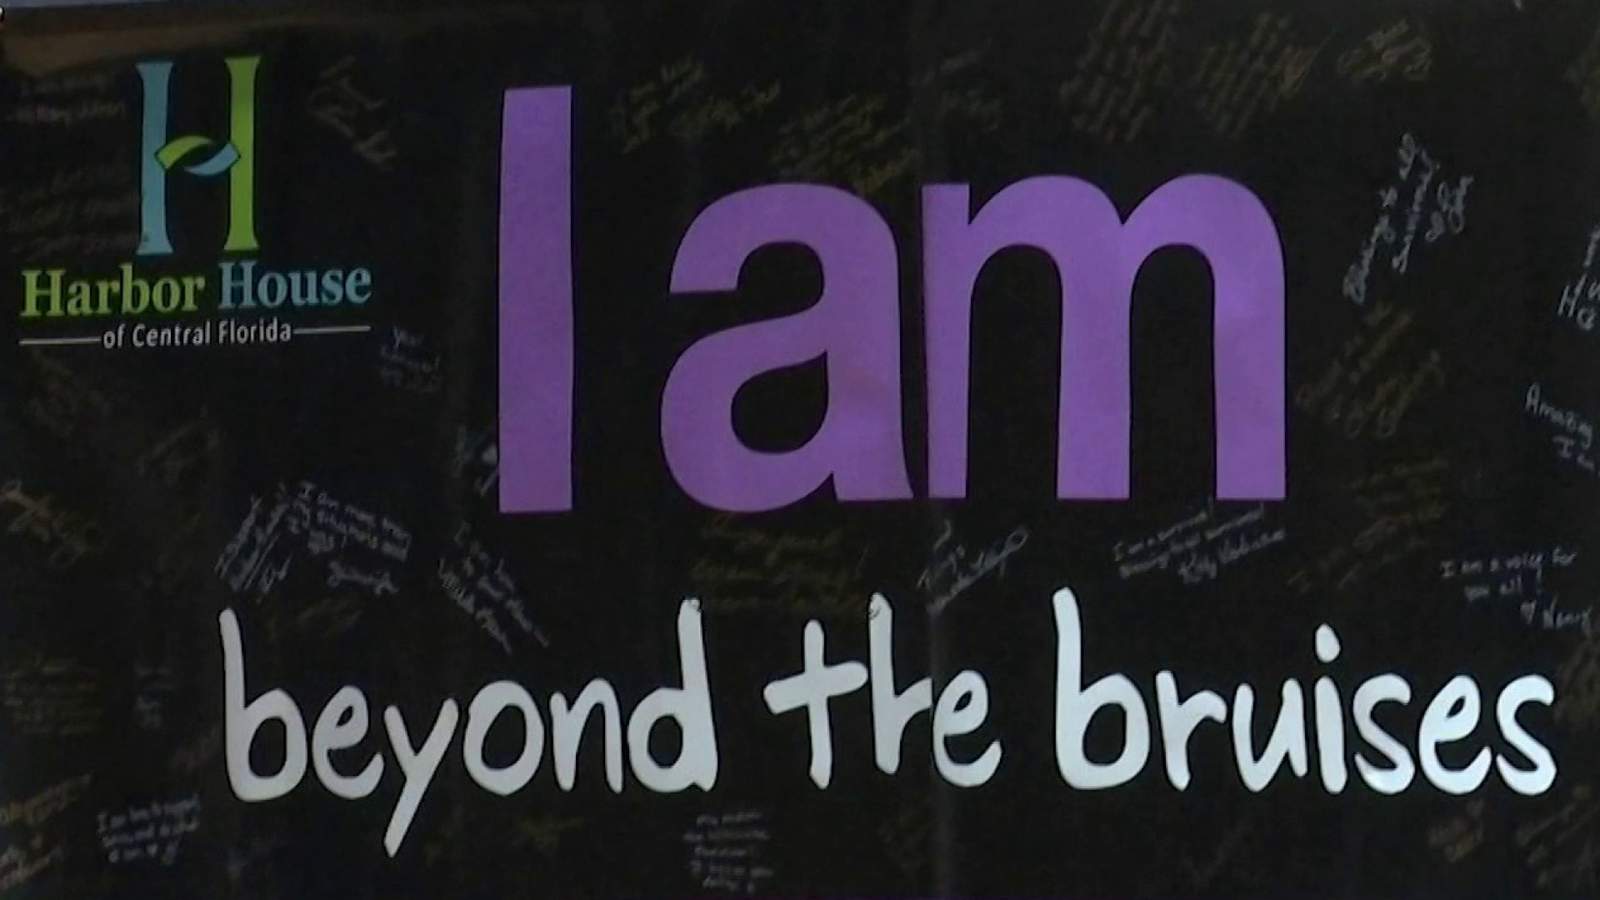 'It takes courage:’ Domestic violence survivors encouraged to speak up